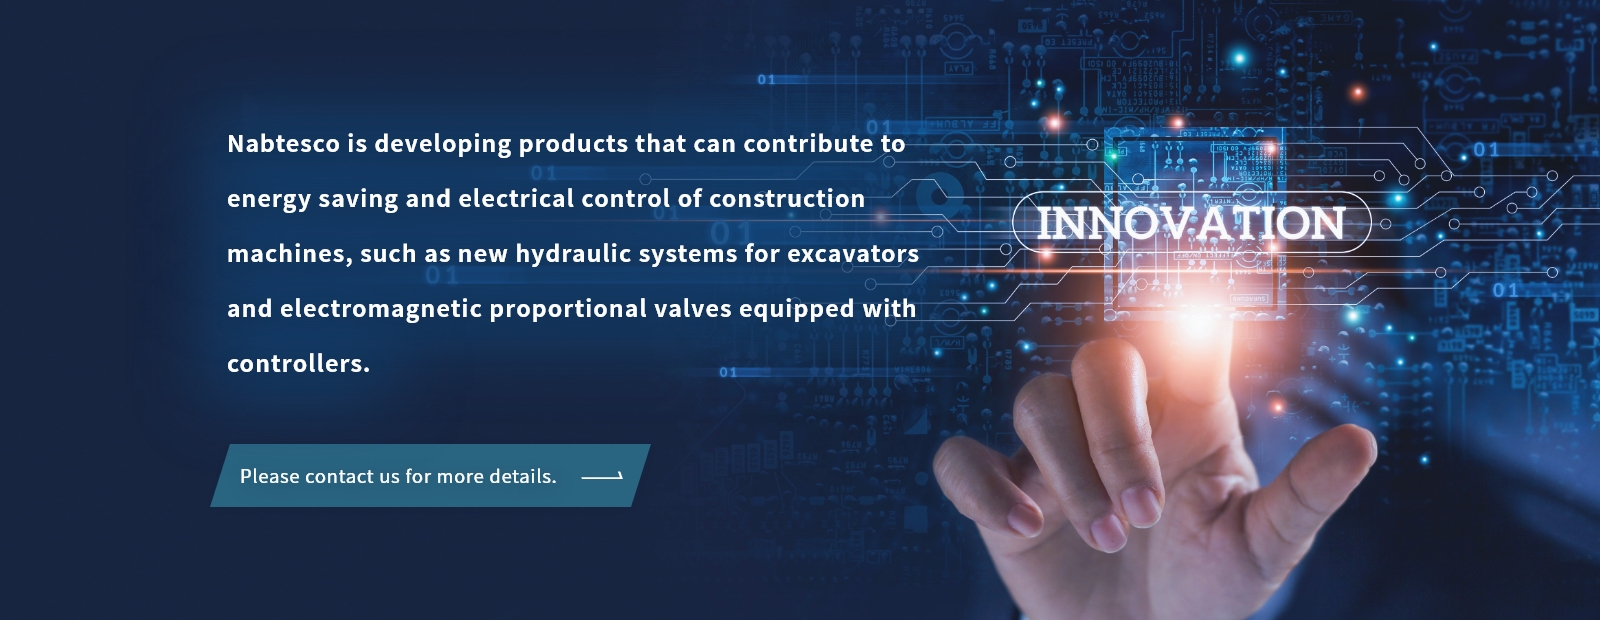 Nabtesco is developing products that can contribute to energy saving and electrical  control of construction machines, such as new hydraulic systems for excavators and electromagnetic proportional valves equipped with controllers.